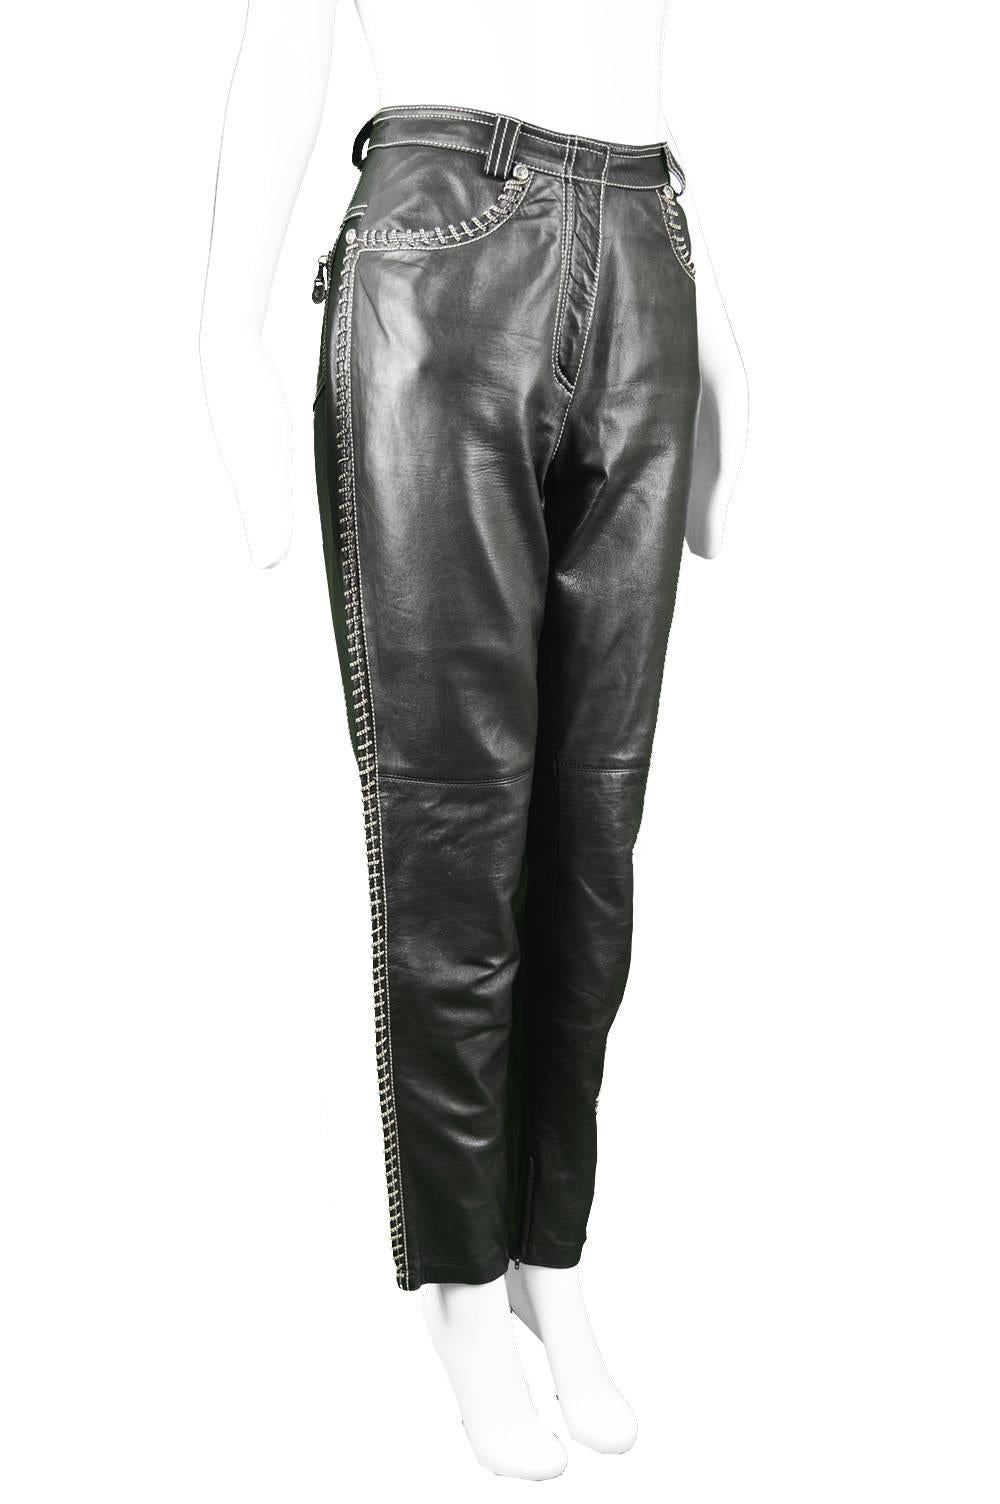 90s leather pants outfit